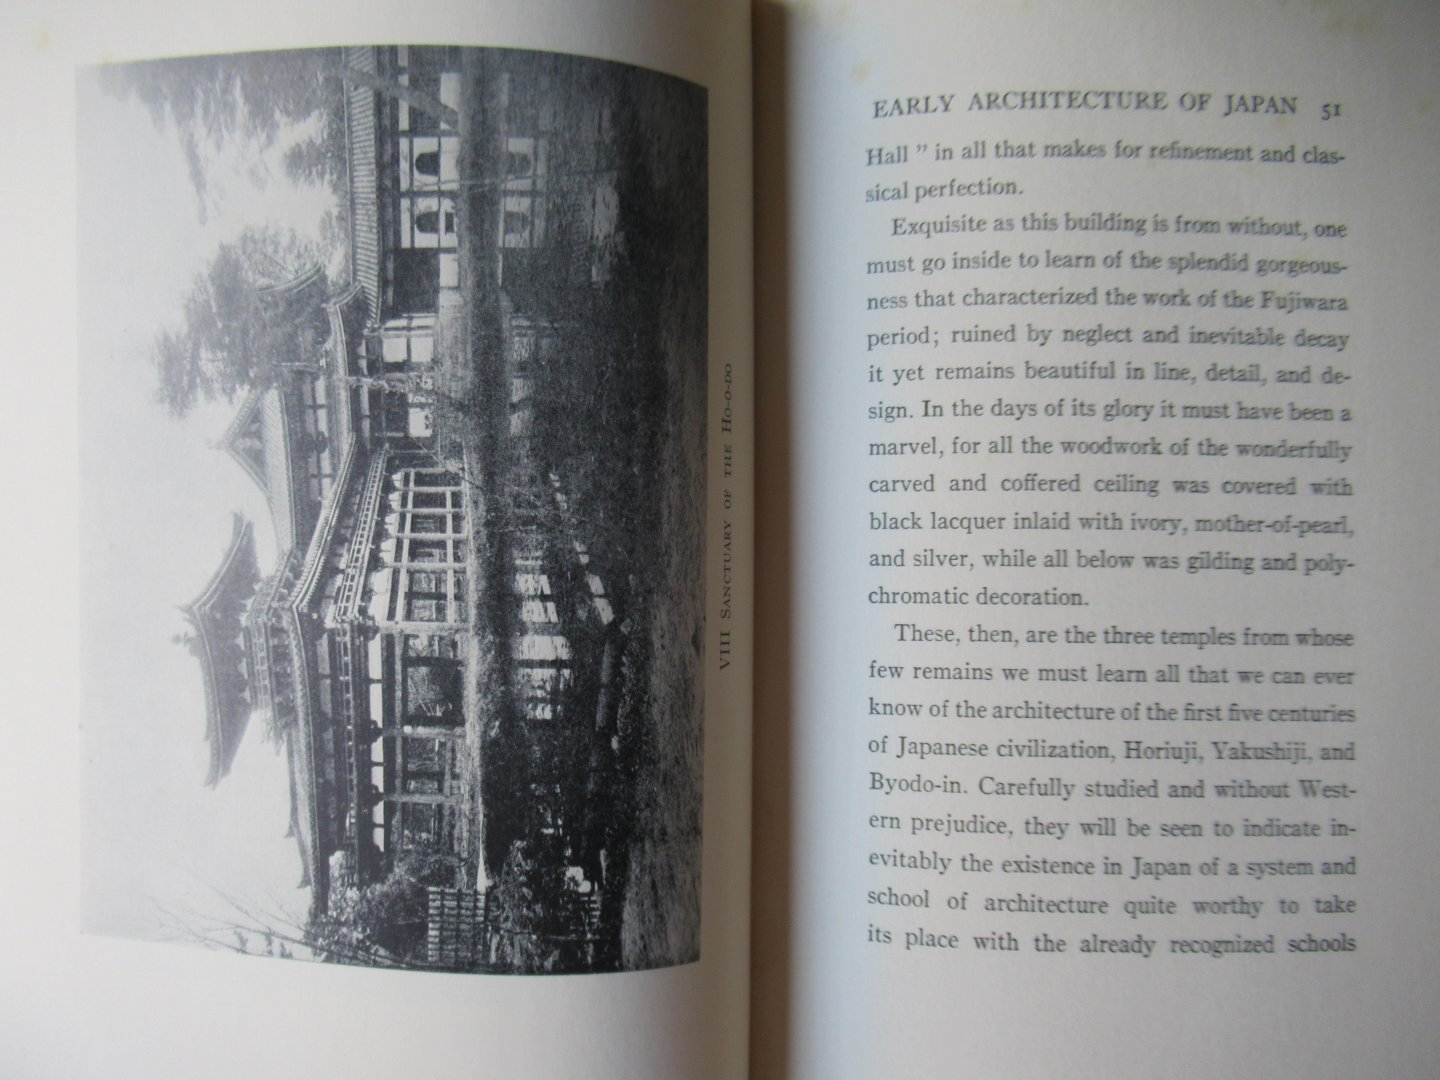 Cram, Ralph Adams - Impressions of Japanese Architecture and the Allied Arts